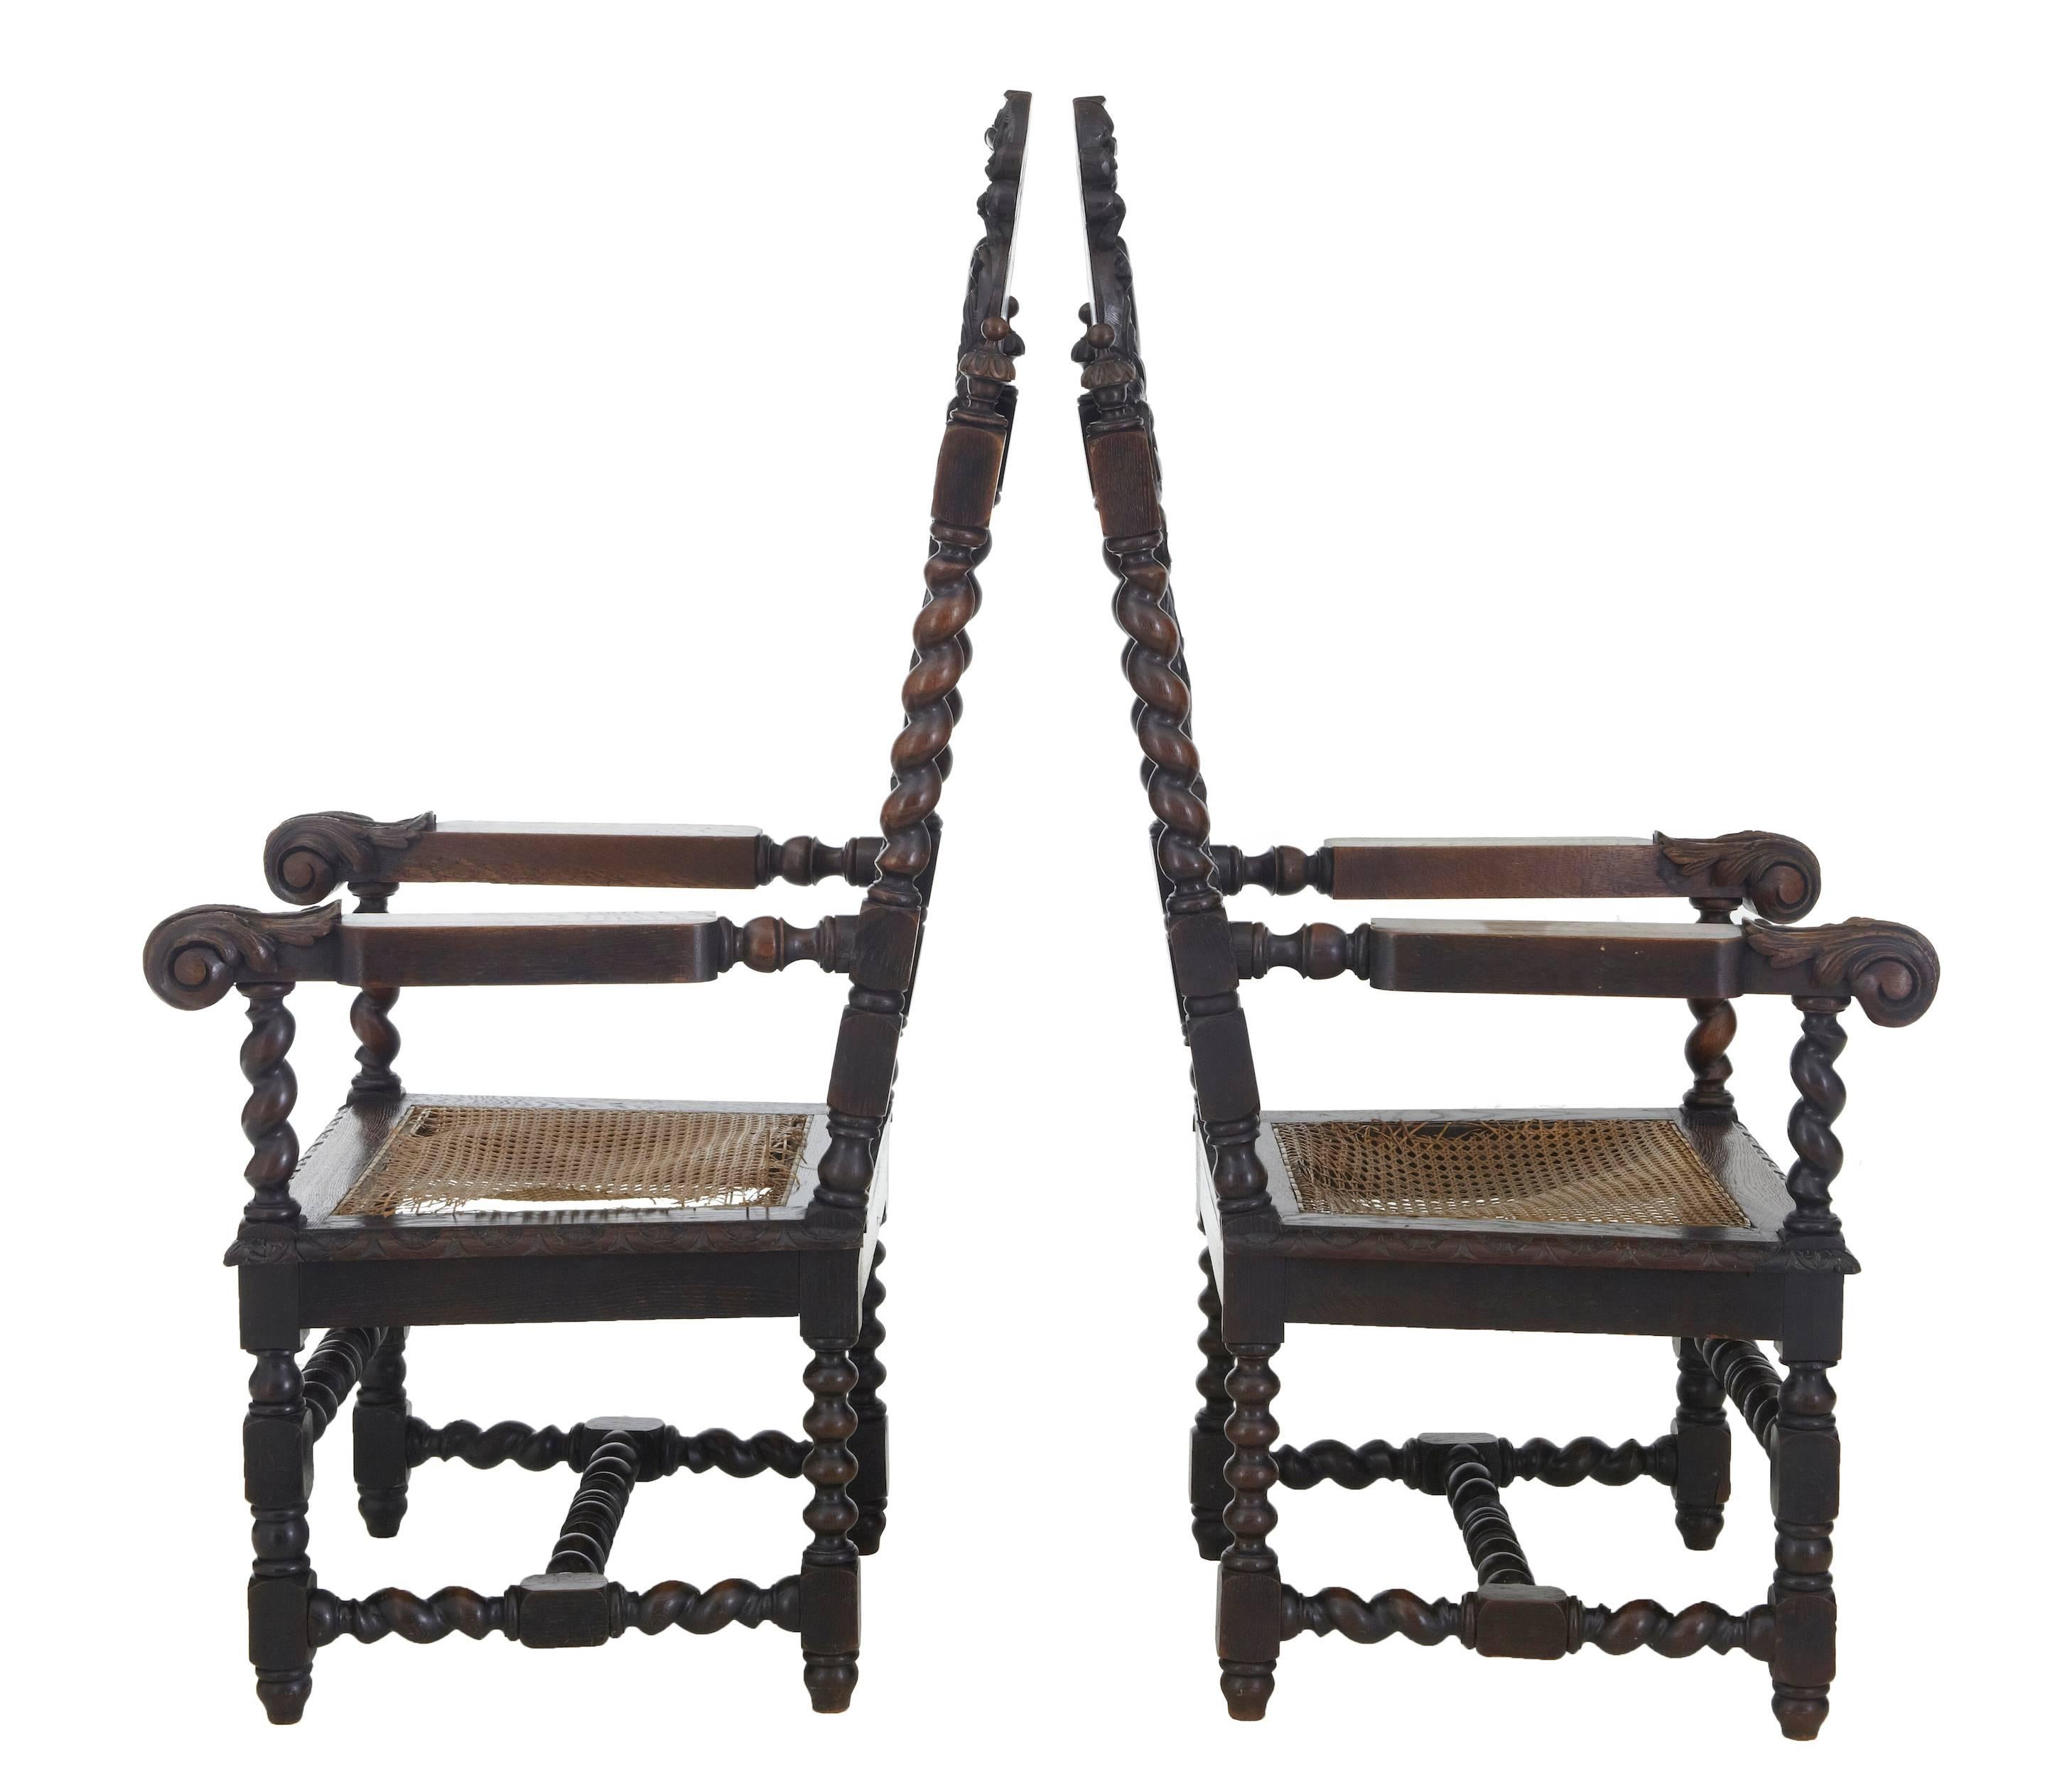 Good quality pair of carved throne chairs, circa 1890.
Beautifully pierced carving with strong depth.
Barley twists to the back, arms and legs.
Original cane work seats are beyond repair, ideal for replacement or adding an inset cushioned